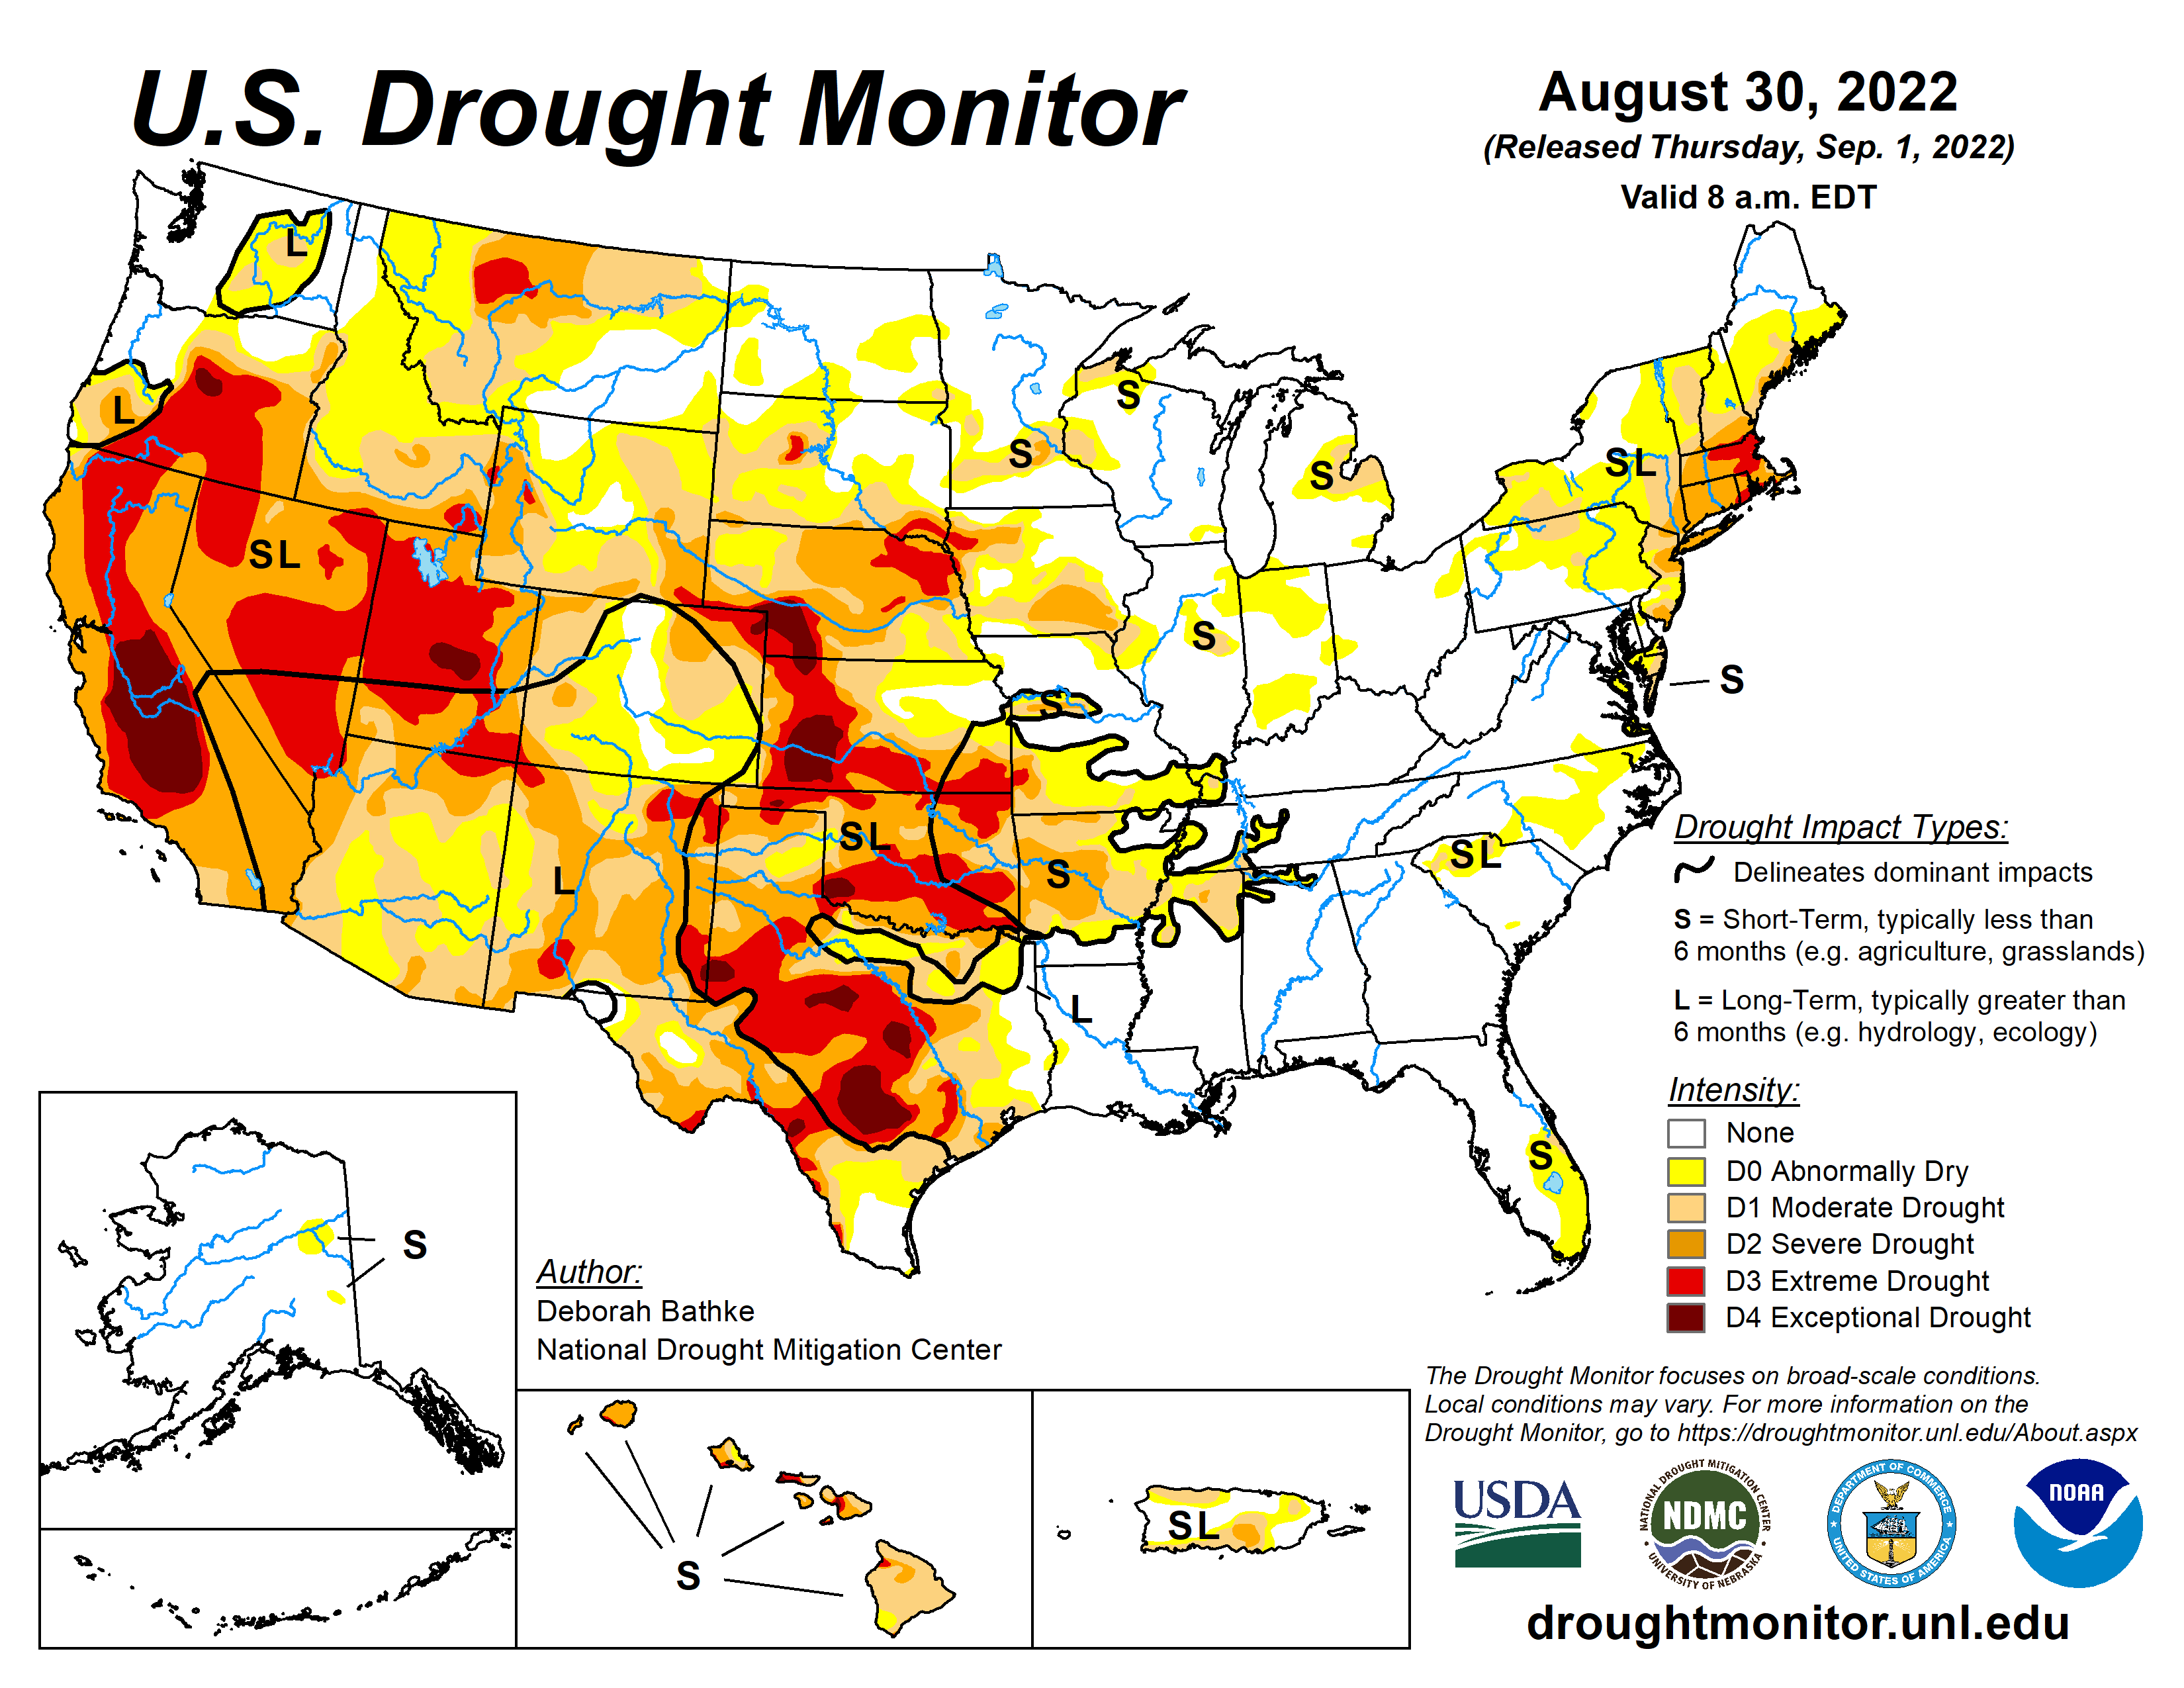 U.S. Drought Monitor, valid August 30, 2022